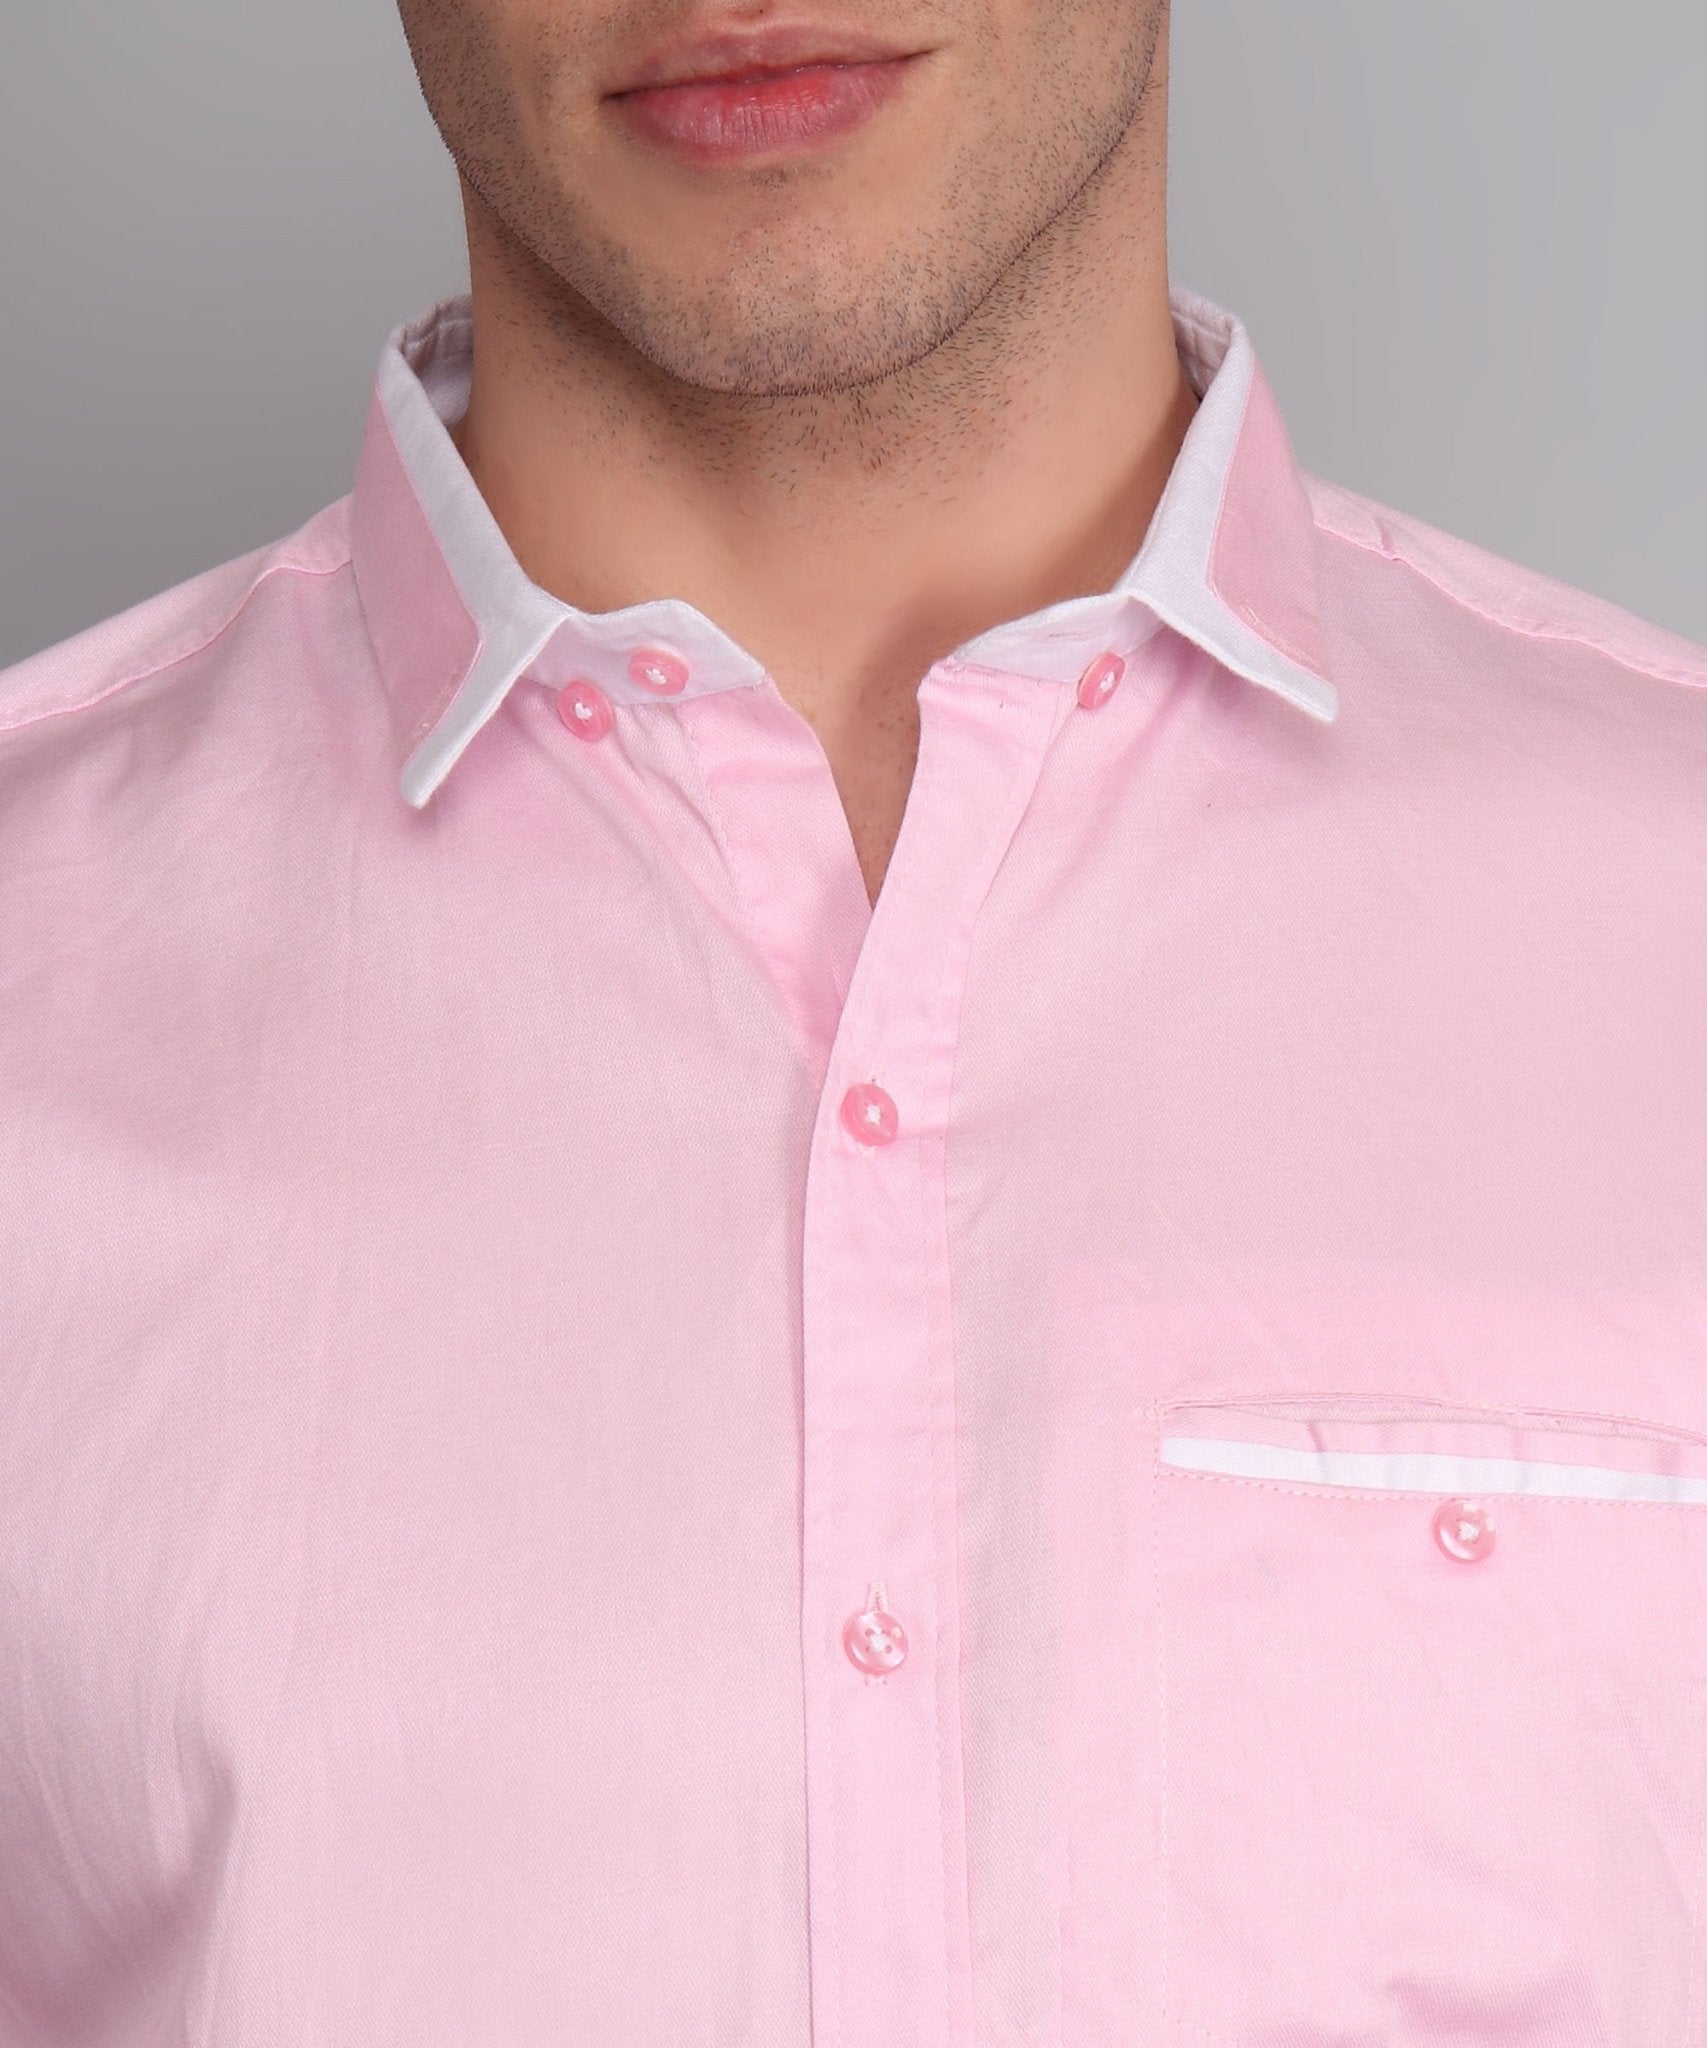 Fancy Fabulous TryBuy Premium Pink Solid Cotton Casual Shirt for Men - TryBuy® USA🇺🇸